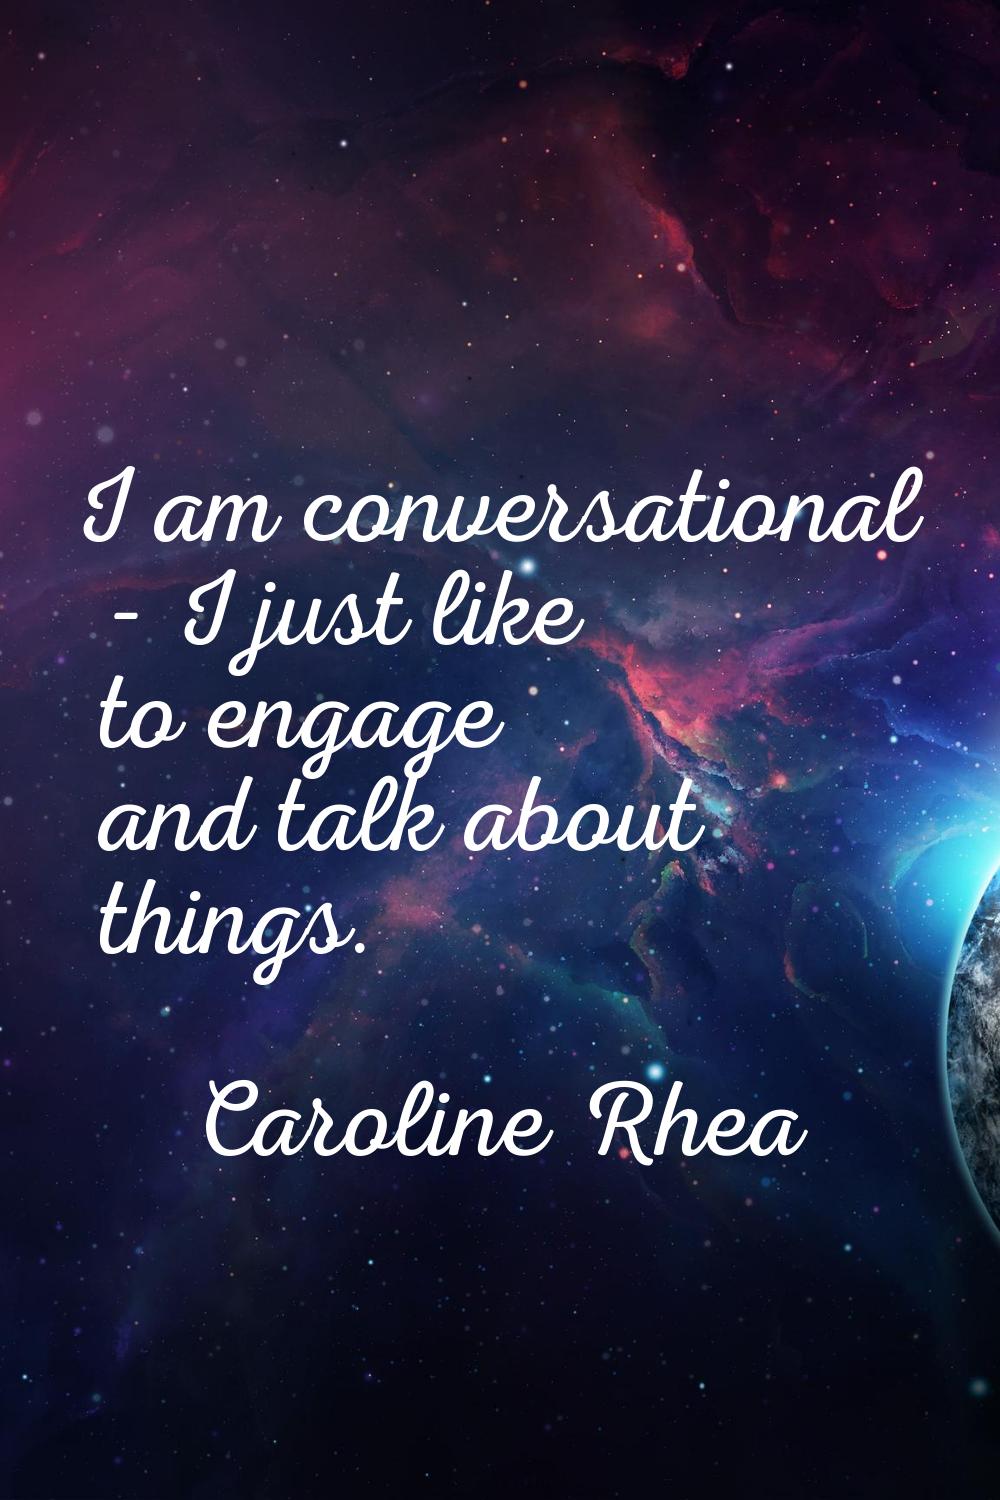 I am conversational - I just like to engage and talk about things.